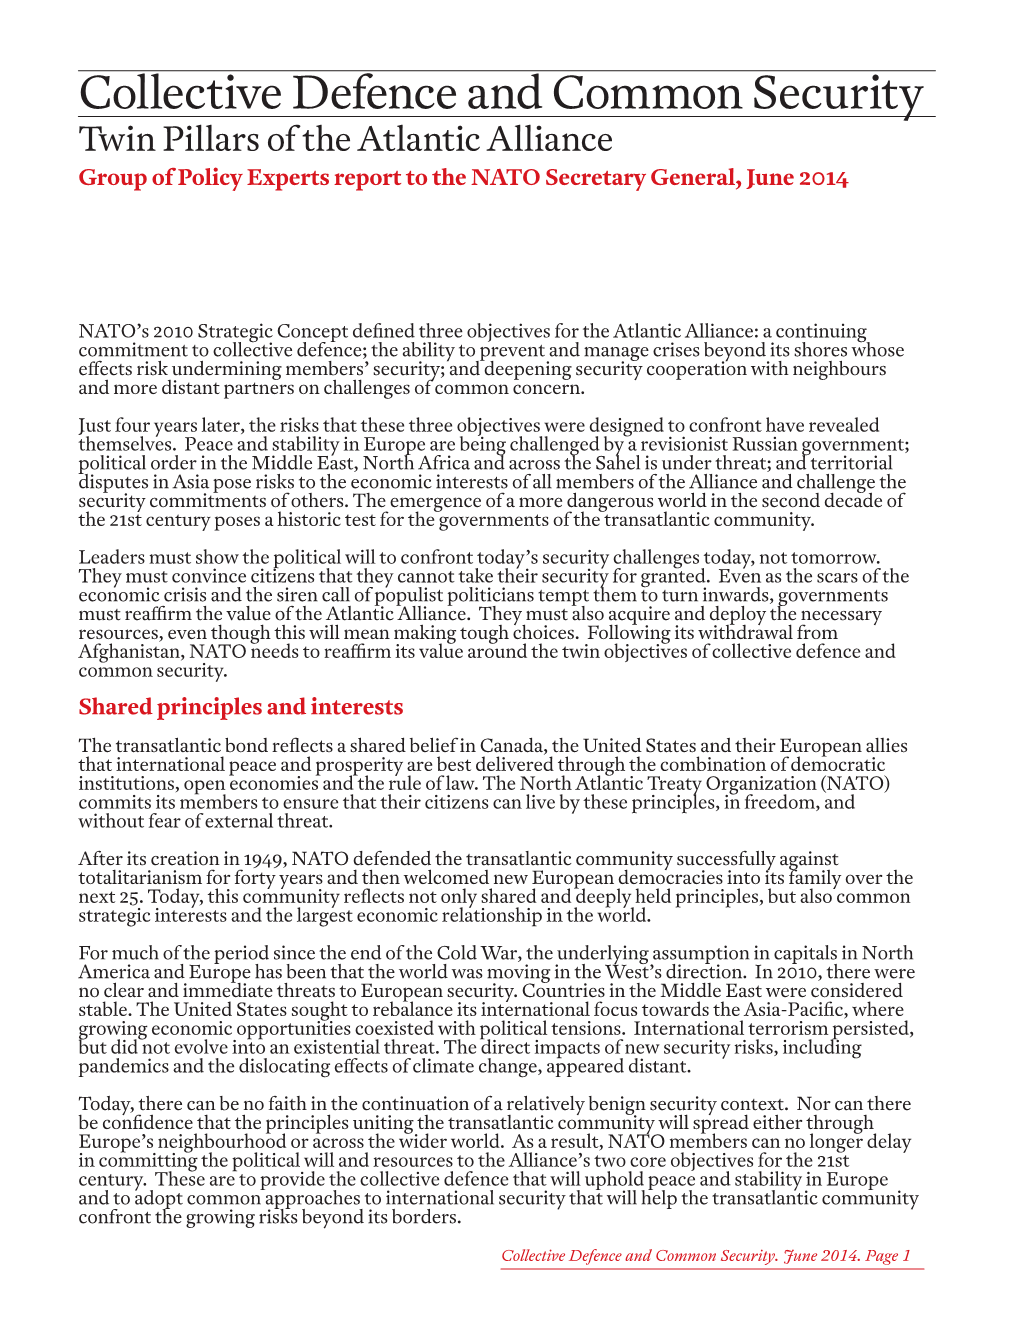 Collective Defence and Common Security Twin Pillars of the Atlantic Alliance Group of Policy Experts Report to the NATO Secretary General, June 2014